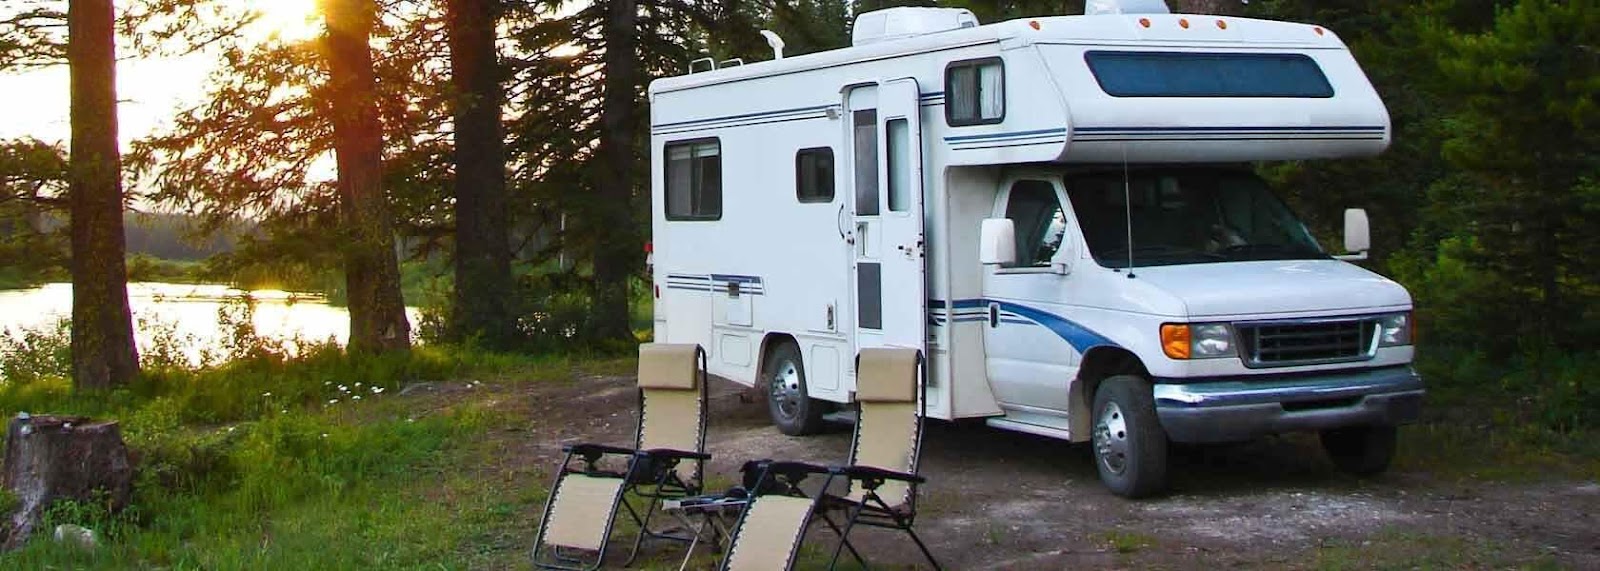 A camper parked in a wooded area

Description automatically generated with low confidence